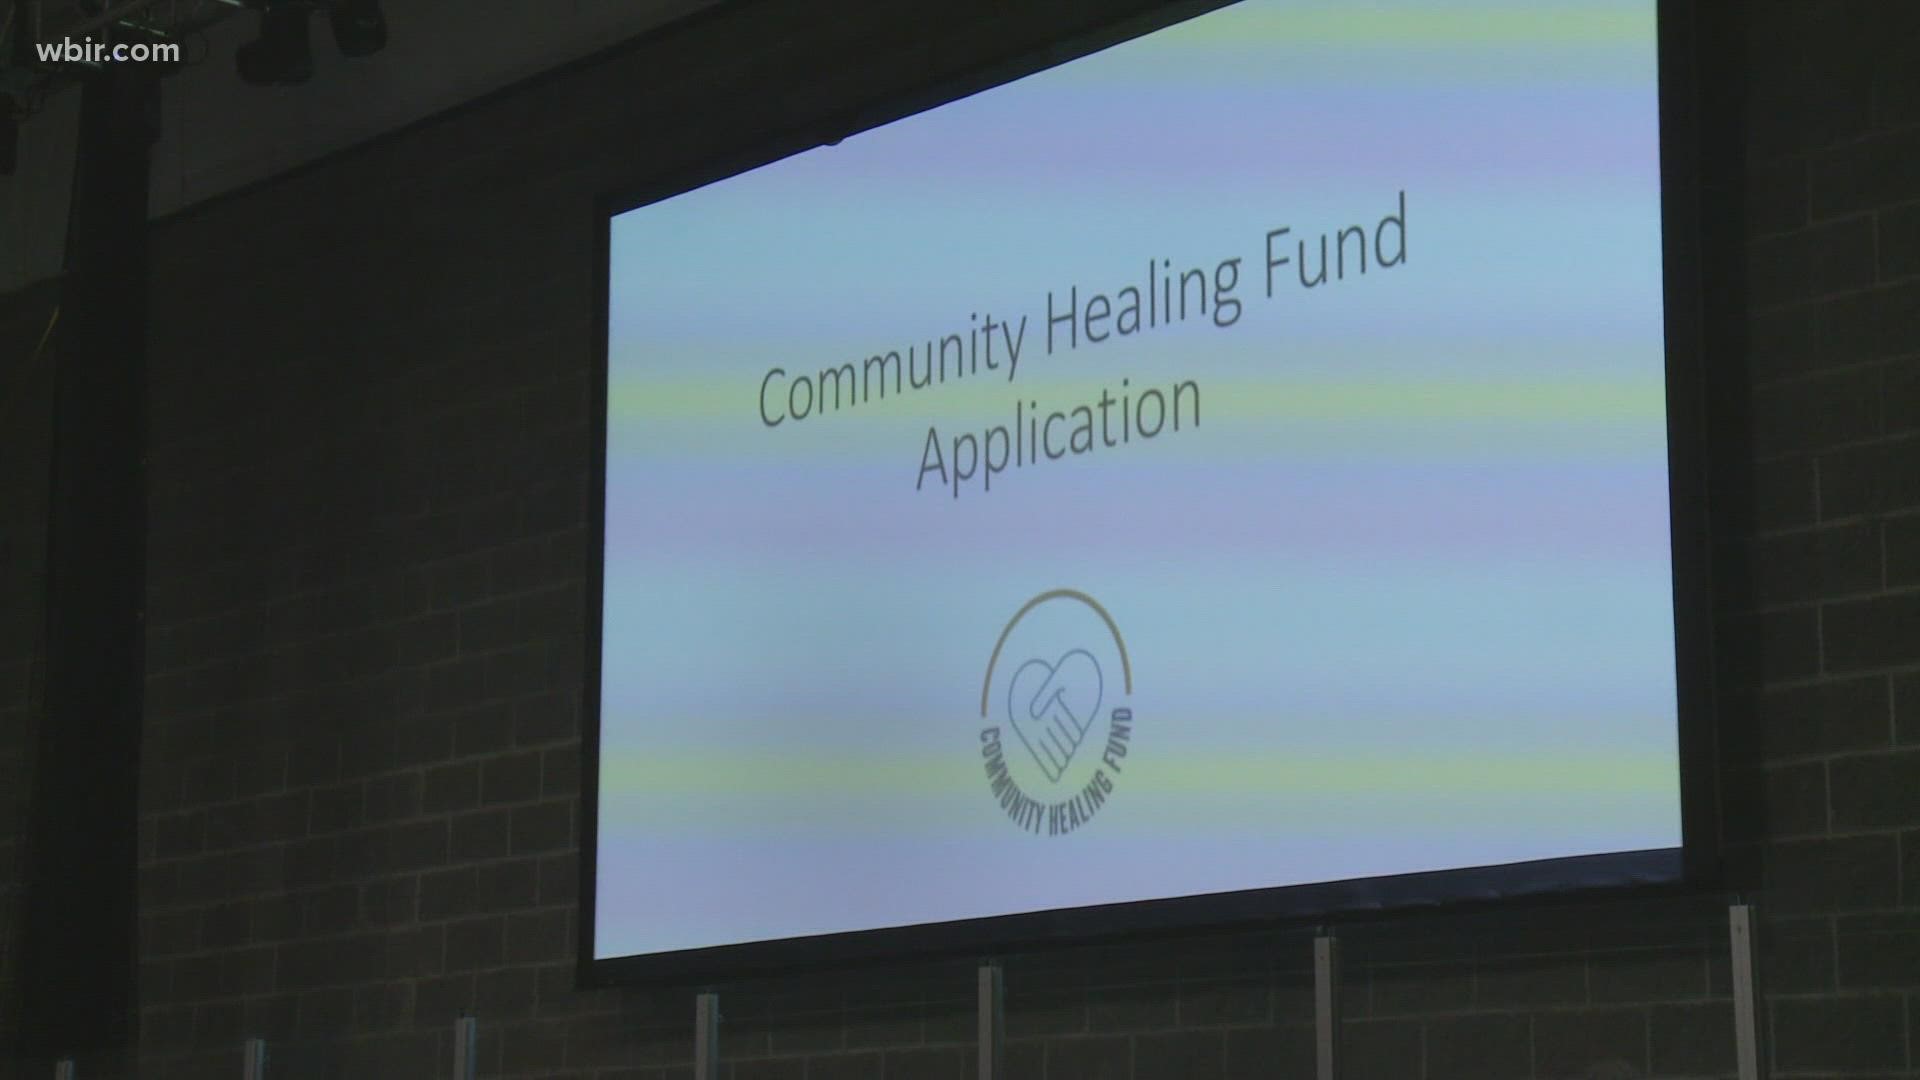 Community leaders met Thursday to discuss efforts to support Black-led nonprofit organizations with the Community Healing Fund.